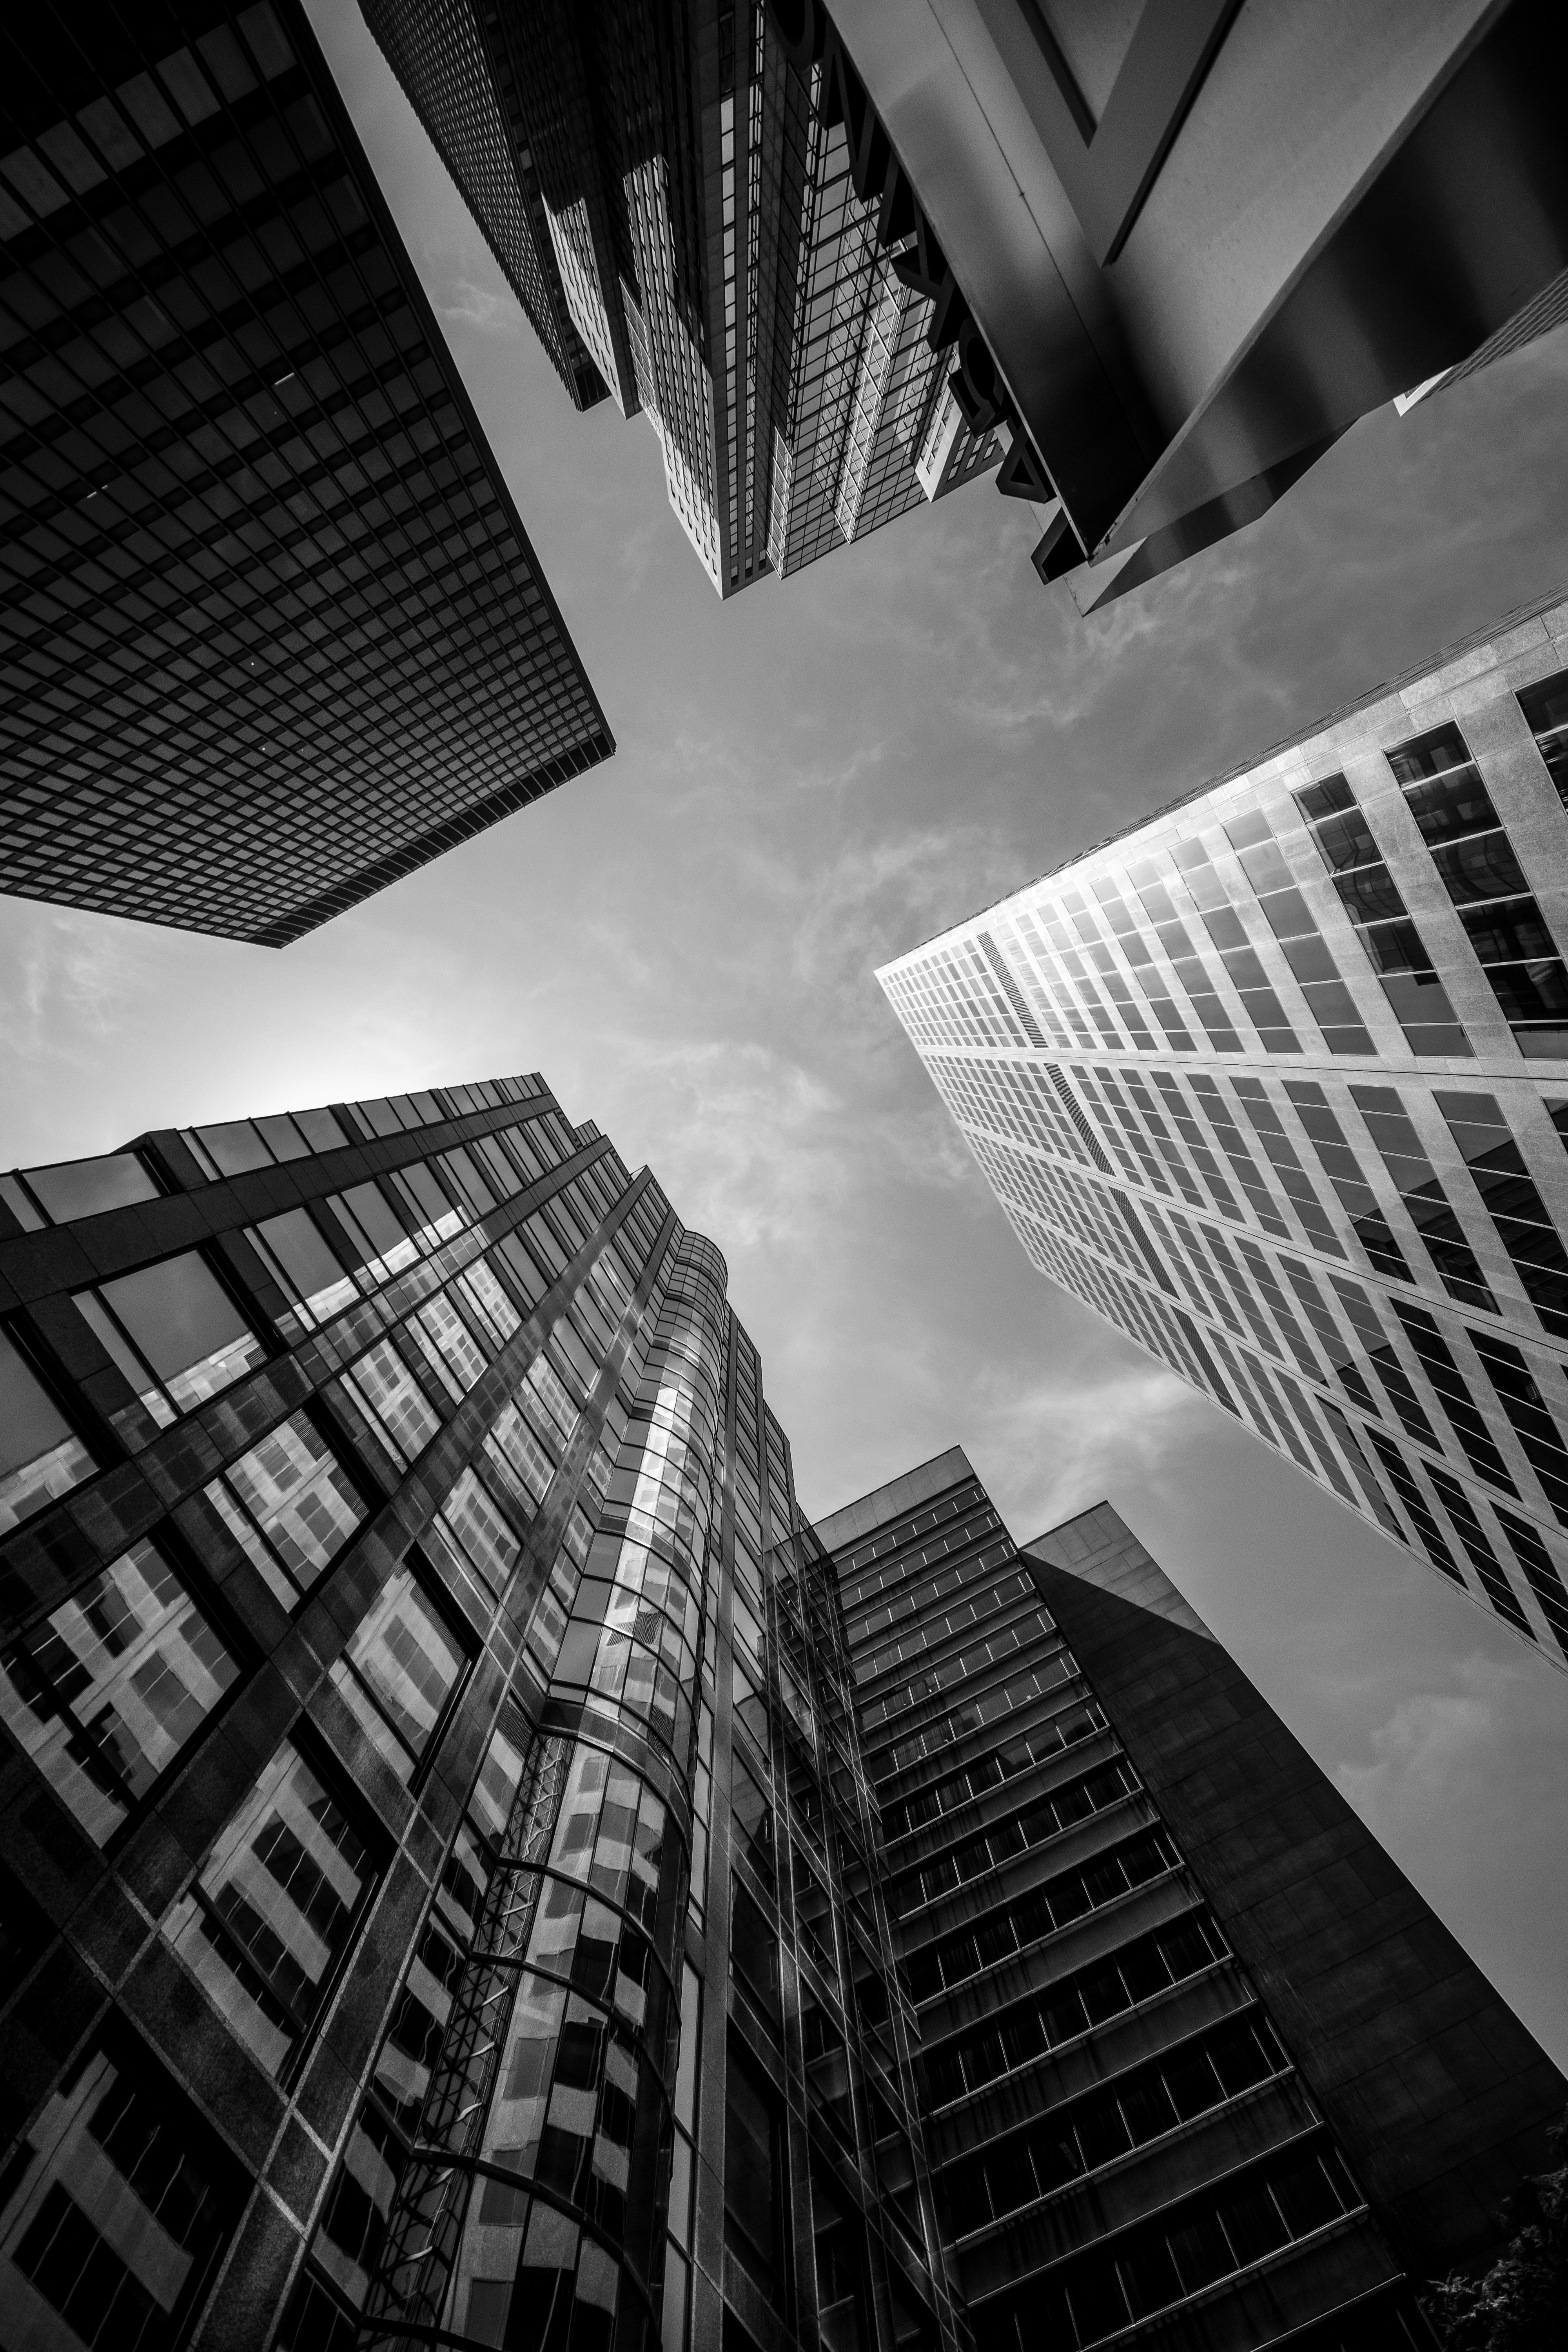 wallpapers architecture, skyscrapers, miscellanea, sky, building, miscellaneous, bw, chb